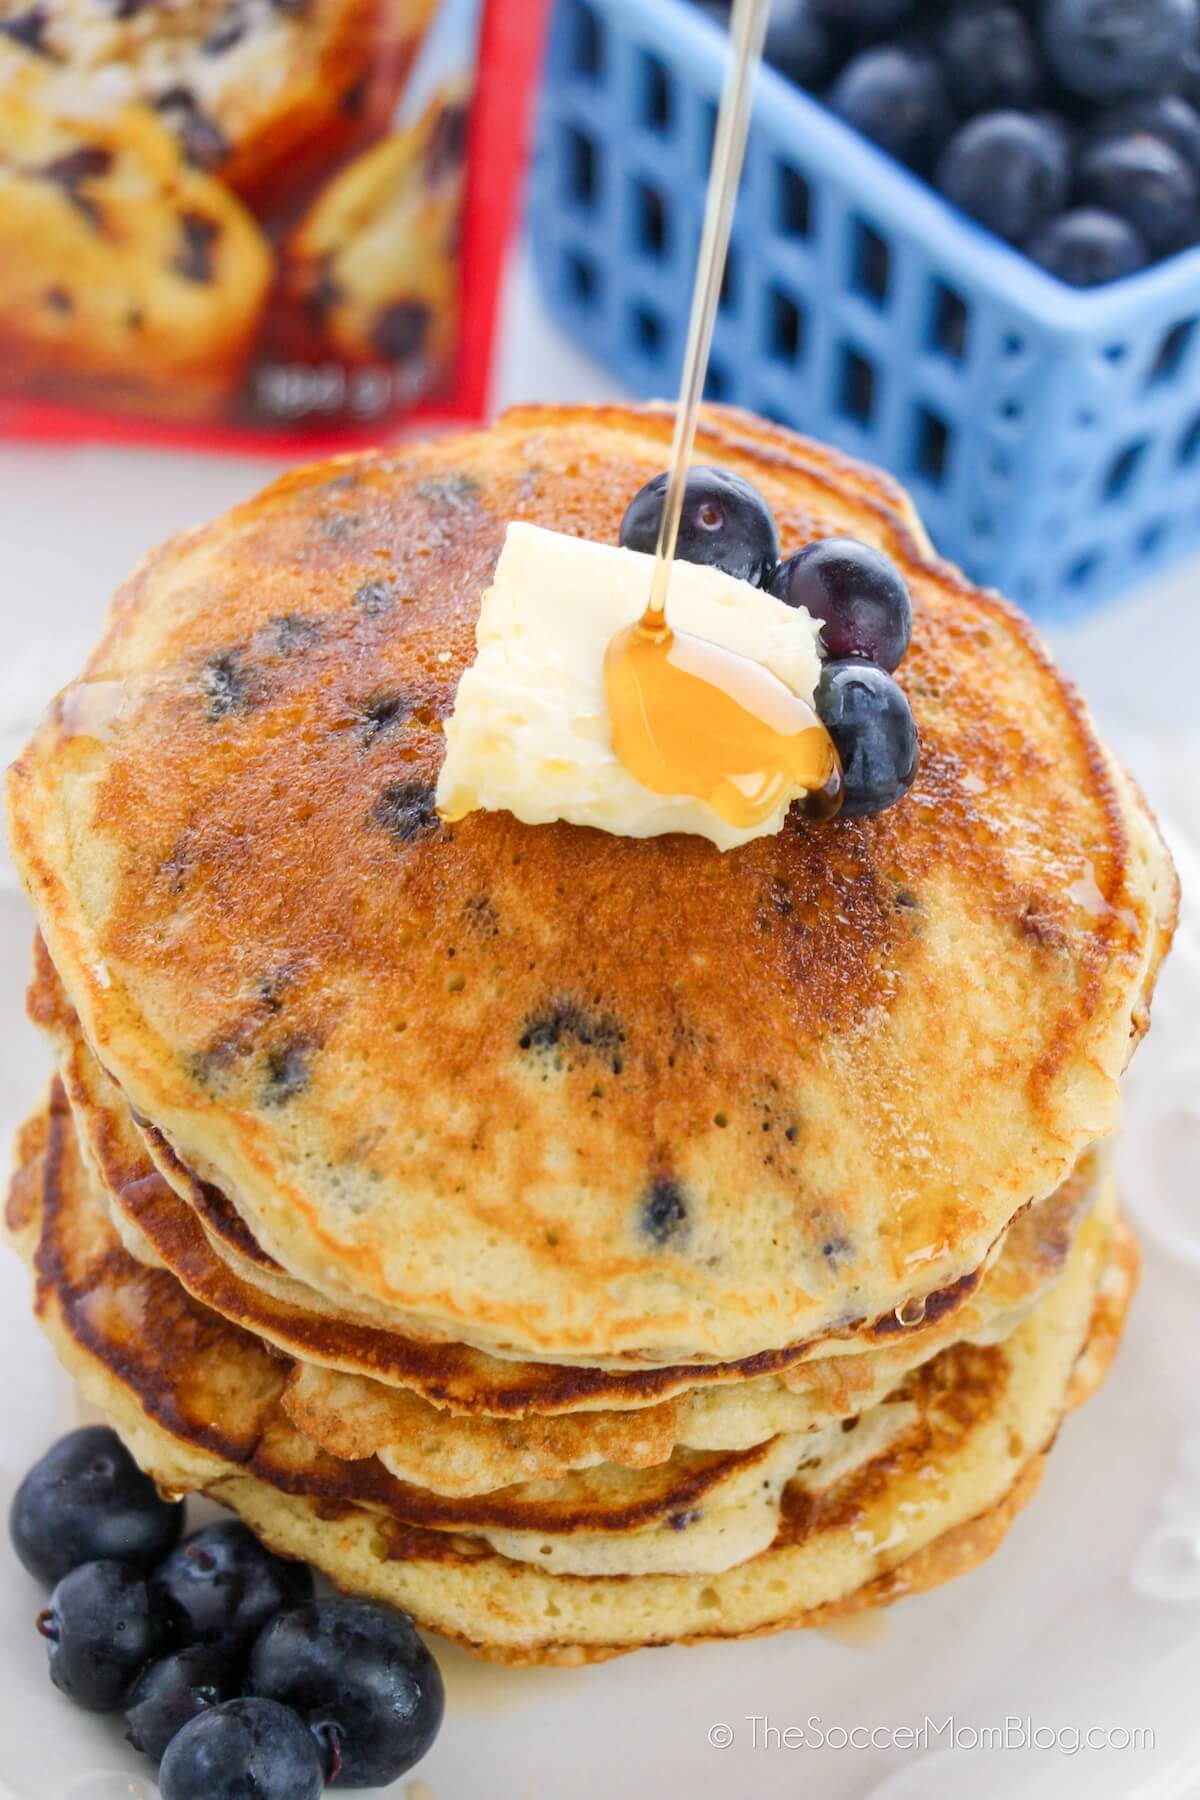 pouring syrup on blueberry pancakes, with crate of blueberries